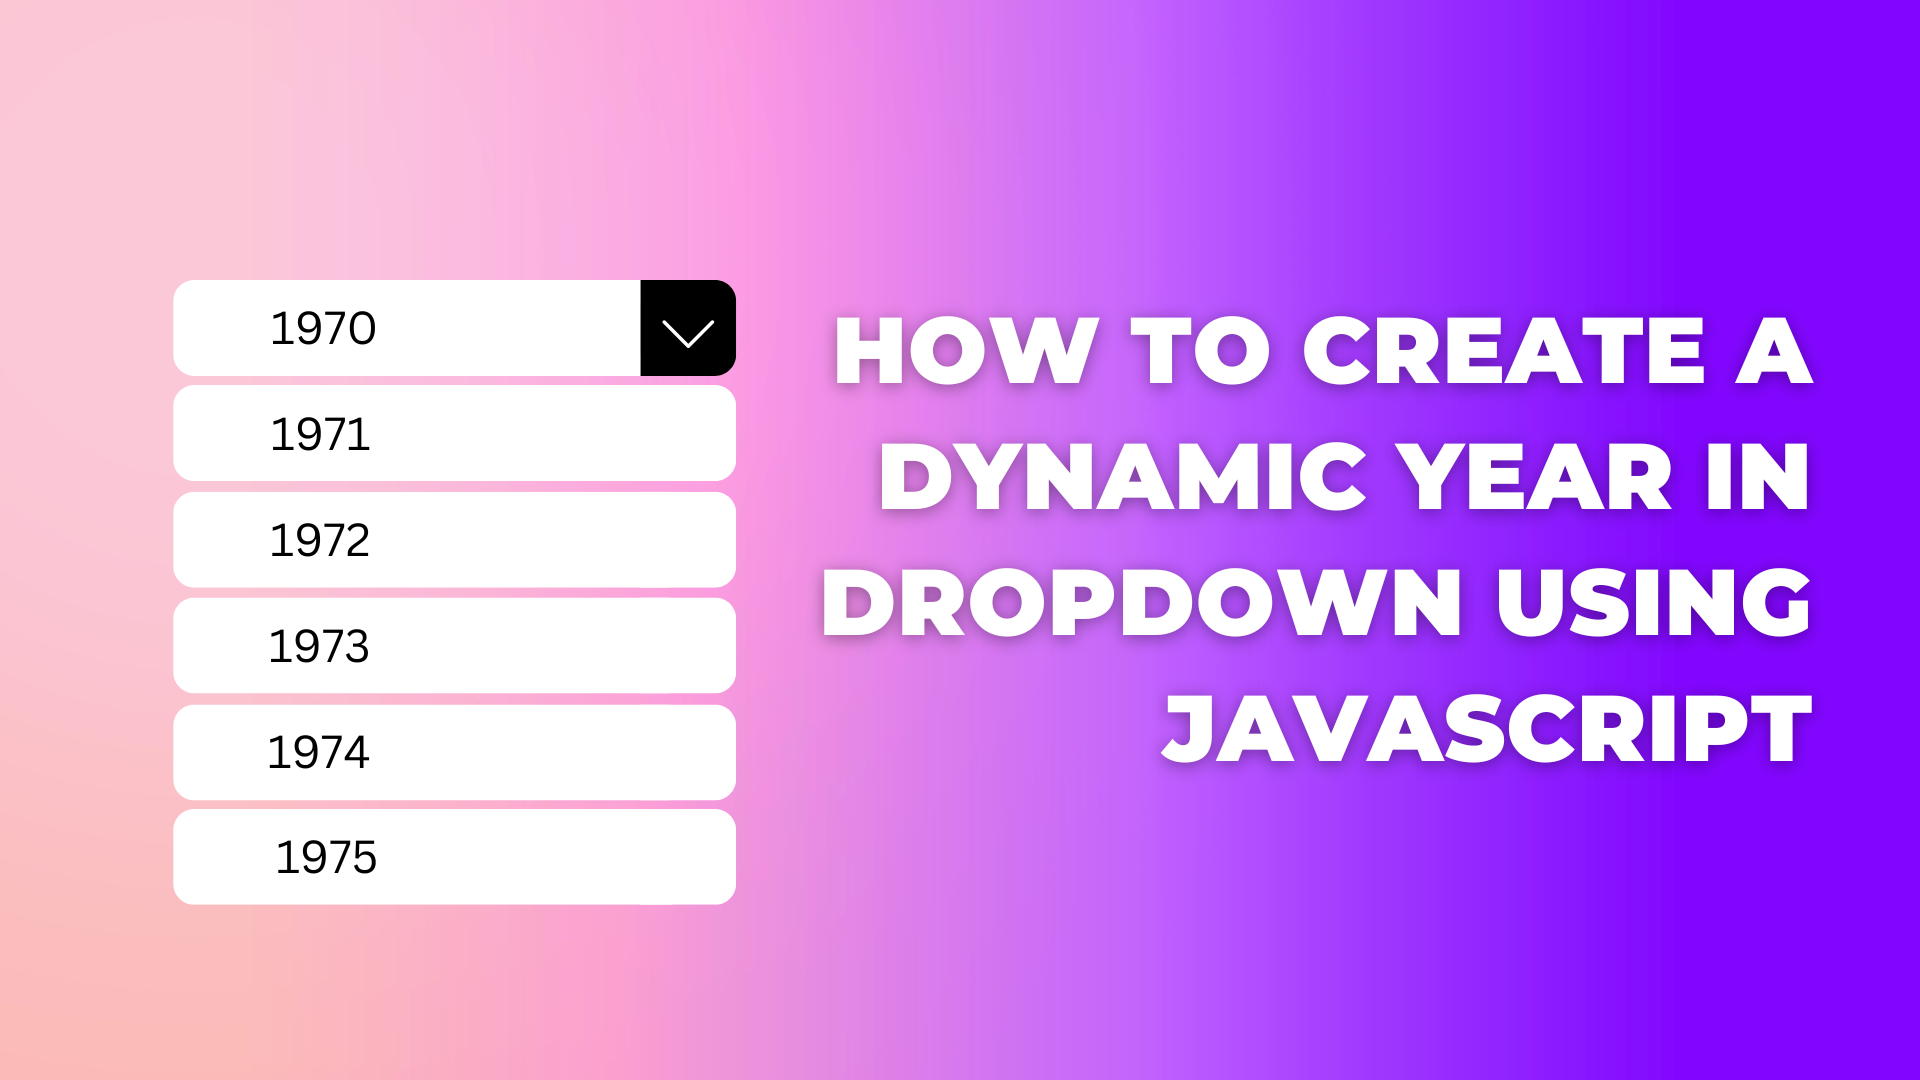 How to create a dynamic year in dropdown using javascript